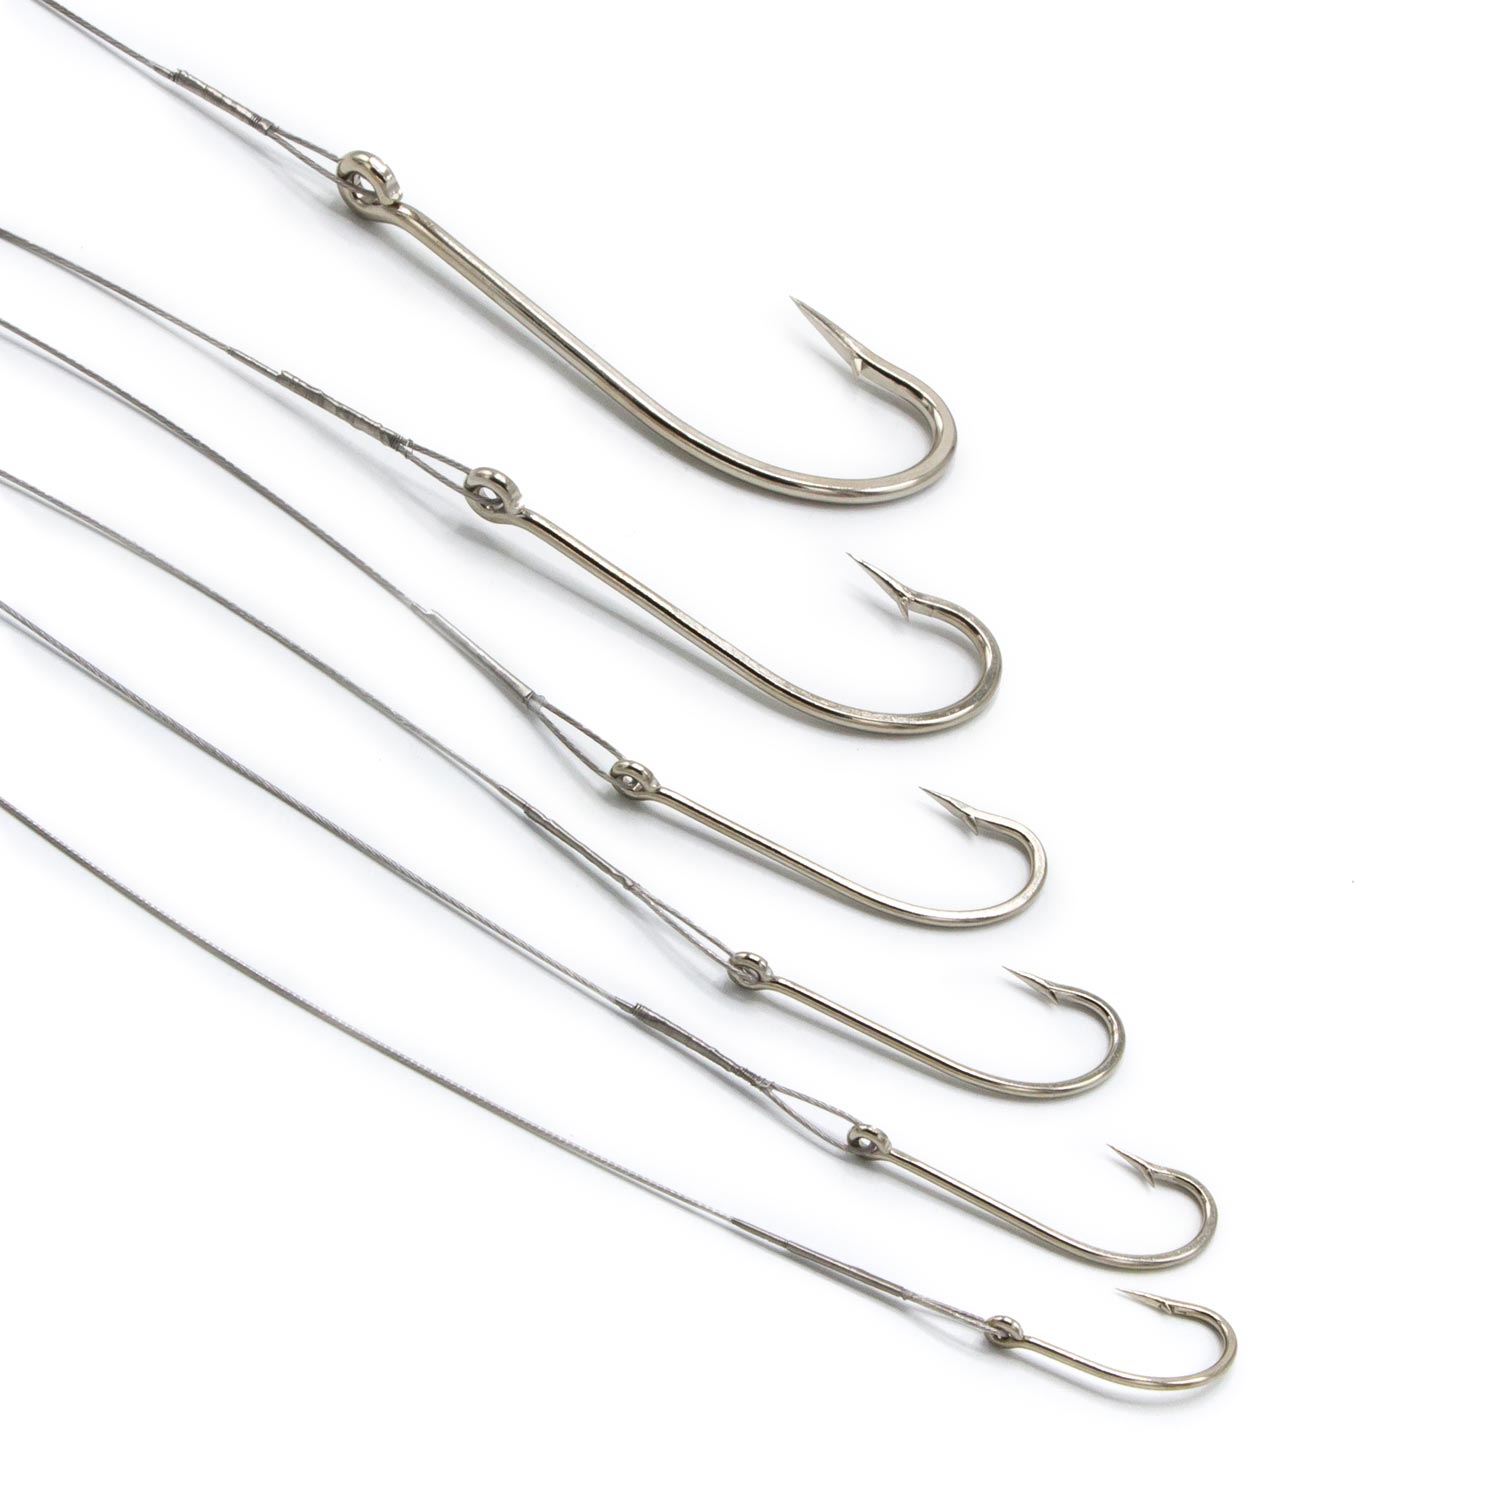 Zebco Quality Trophy Trout Leader Hooks Fishing Hooks with Leader Pre-Tied  Fishing Line Fishing Accessories, Silver, 6